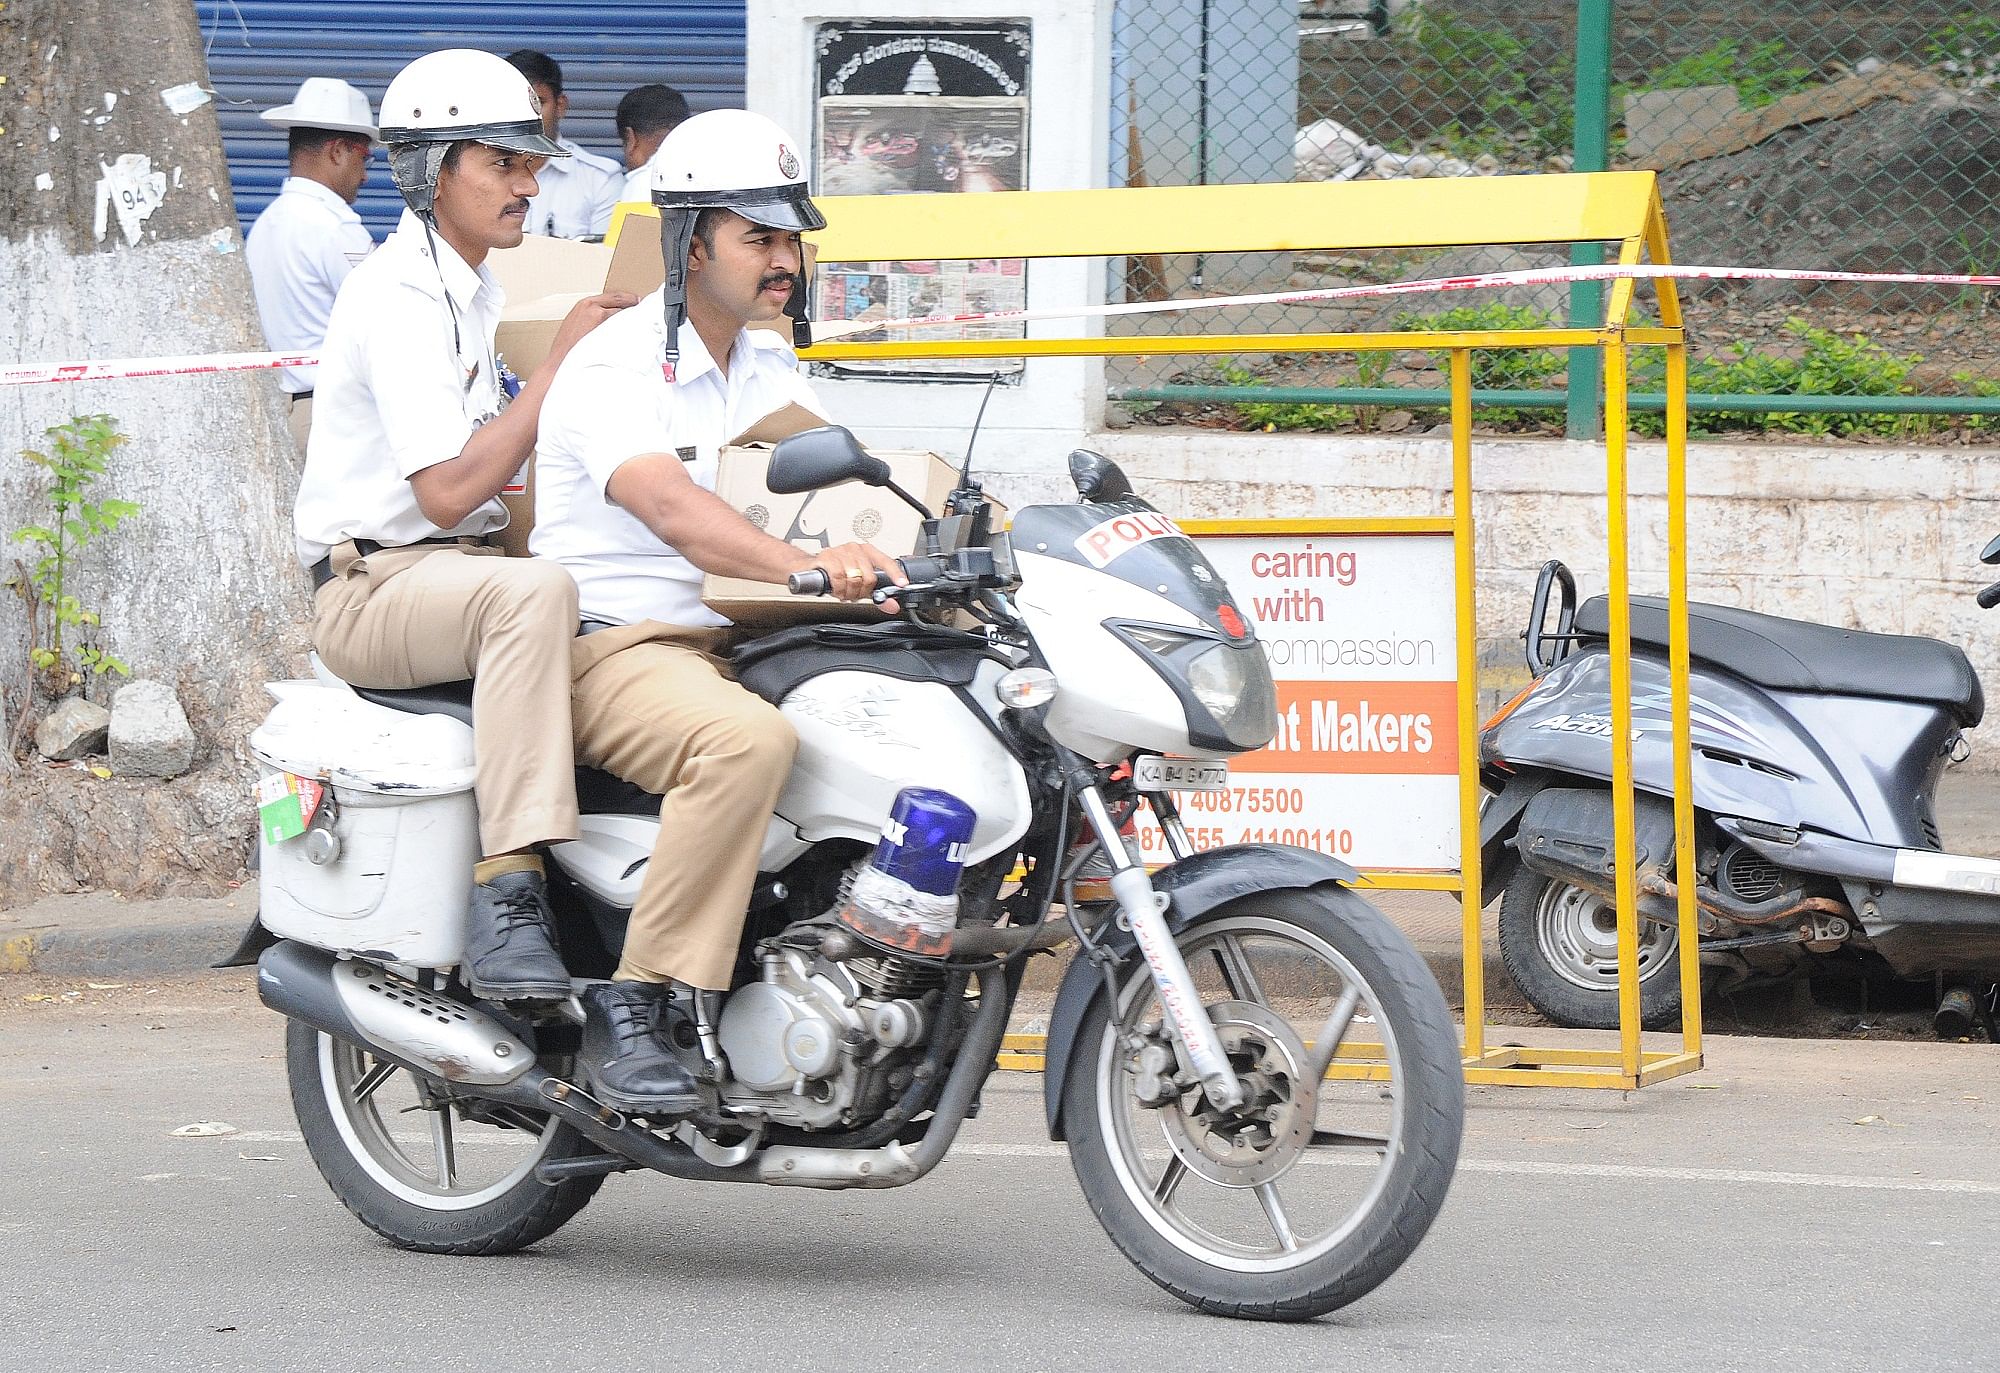 Not strapping helmets or improper use of helmets is a common sight in the city, even among police officials. DH PHOTO BY SRIKANTA SHARMA R